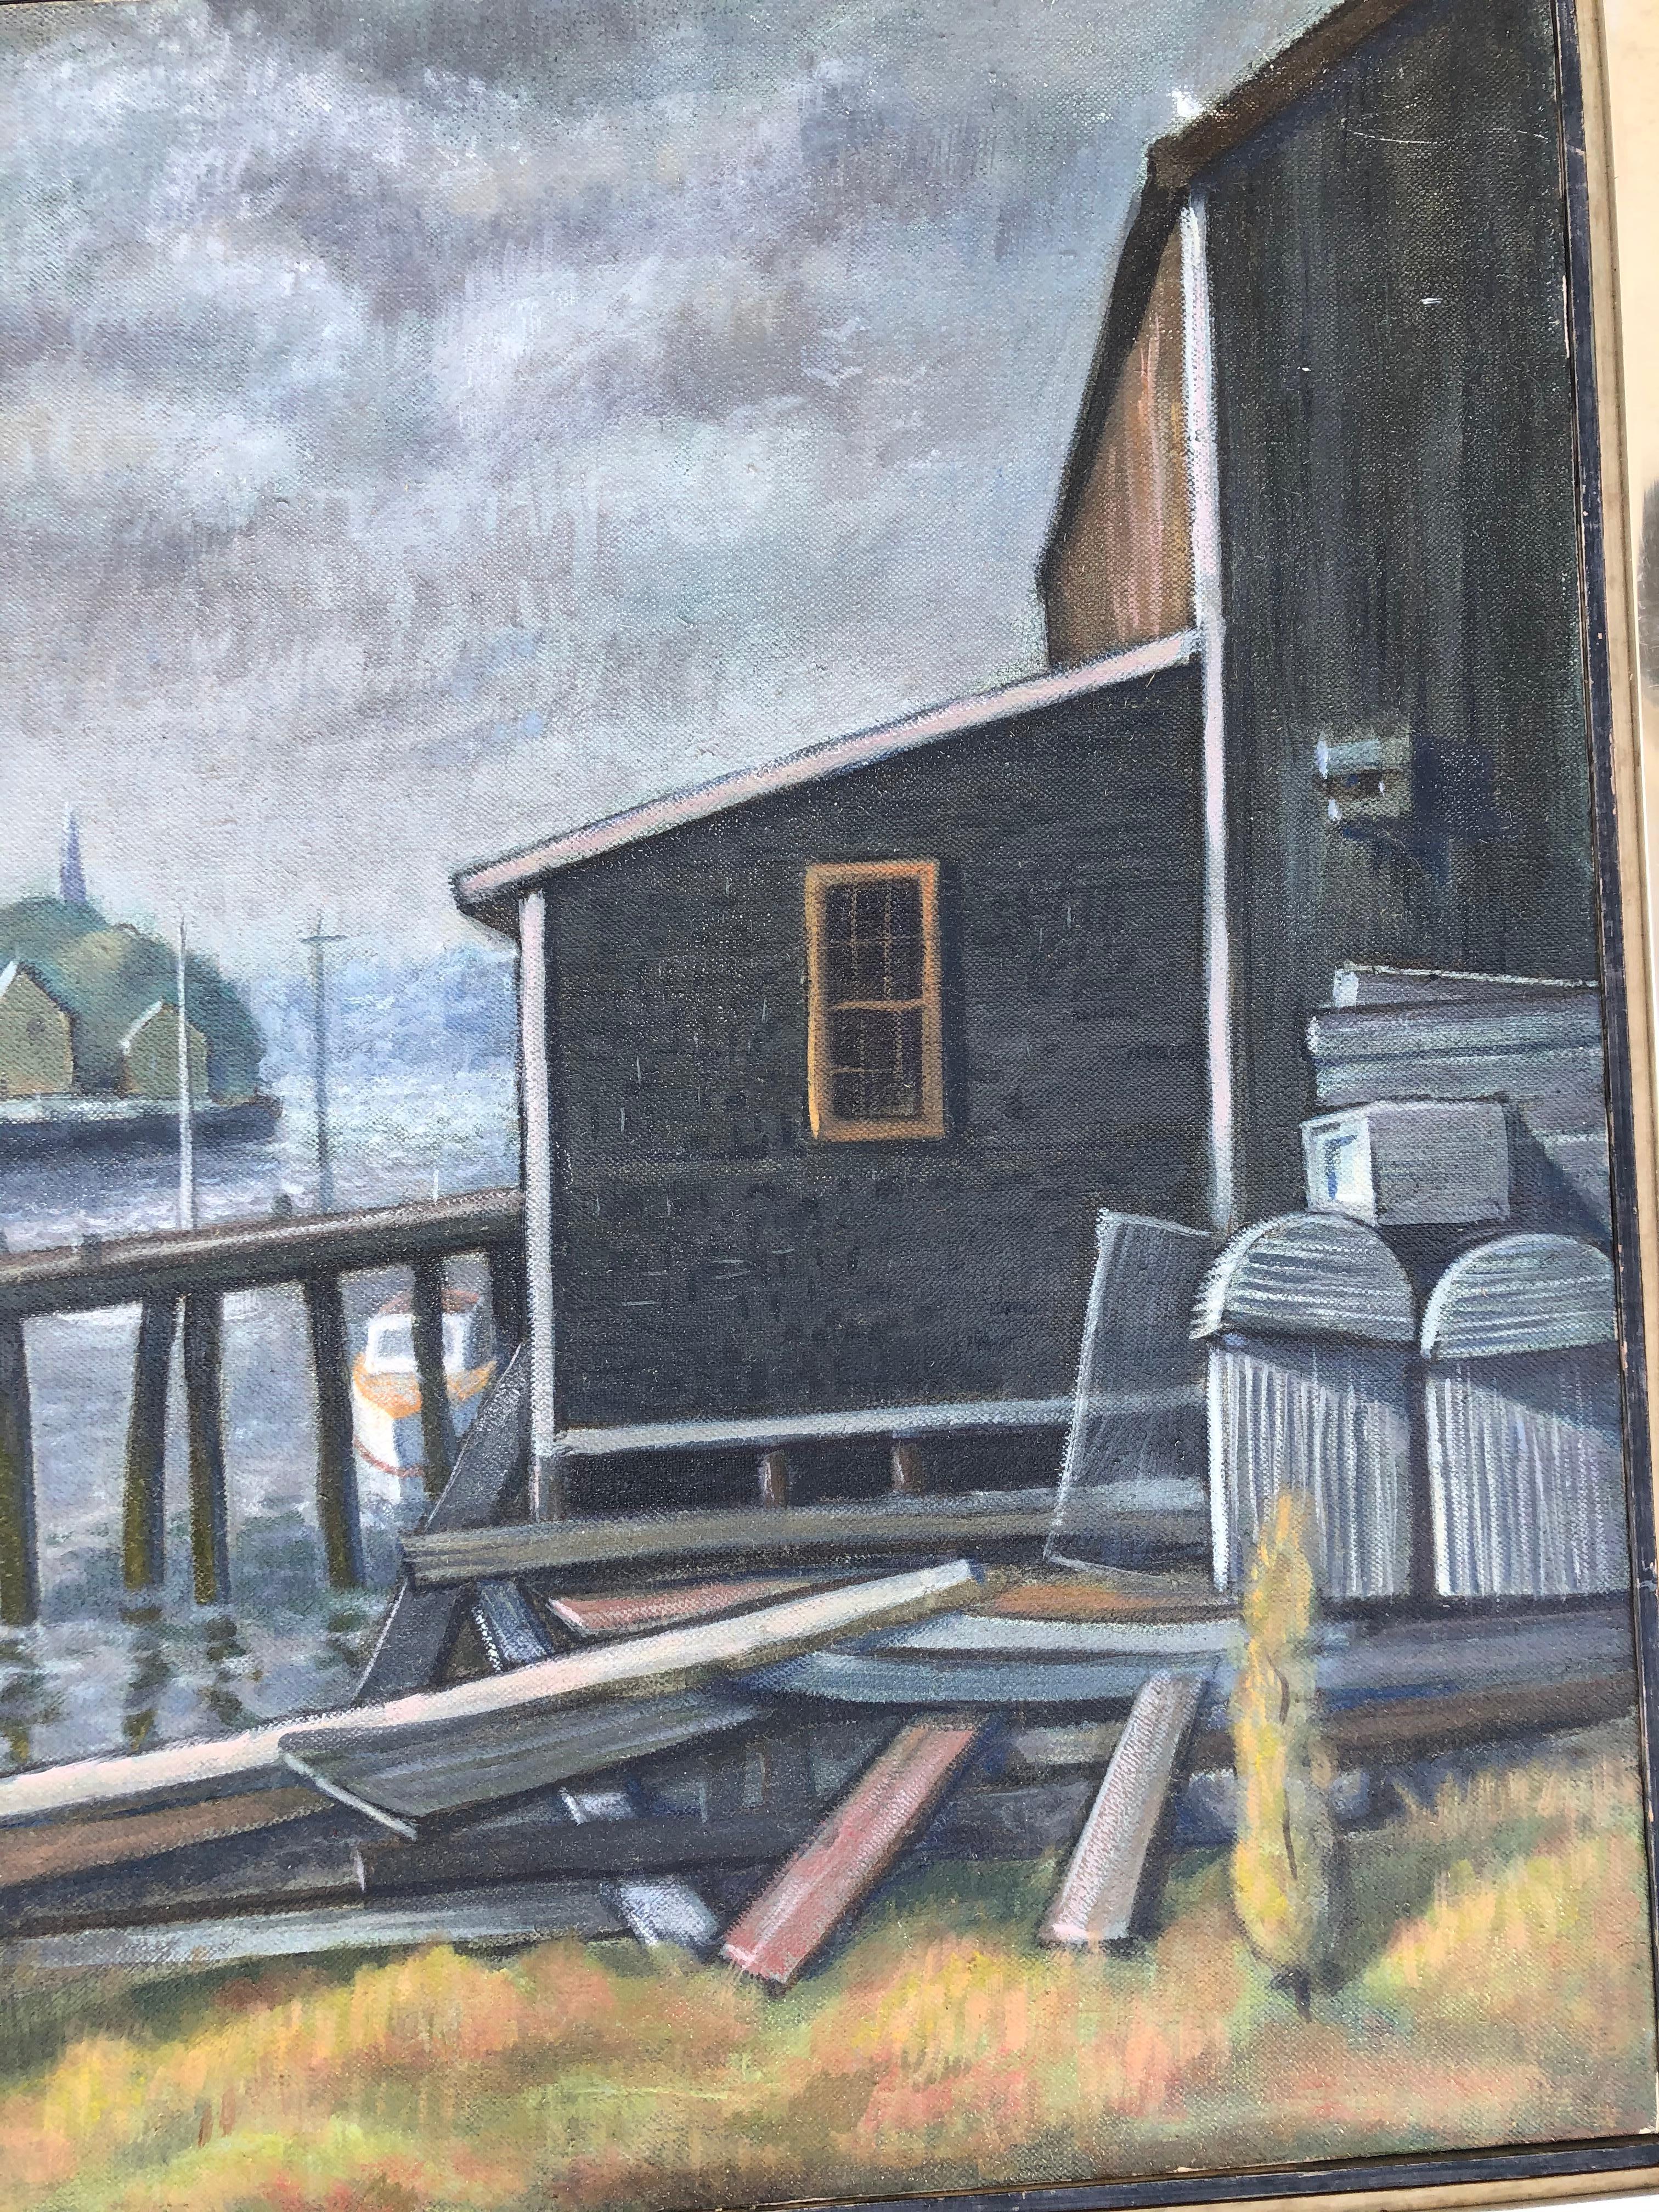 James Bonelli: 1916-2000. Listed American artist from Philadelphia who studied at PAFA. Just a few weeks ago a smaller Gloucester painting by him sold at auction for over $1600. This wonderful harbor scene measures 36 inches wide by 24 high. The